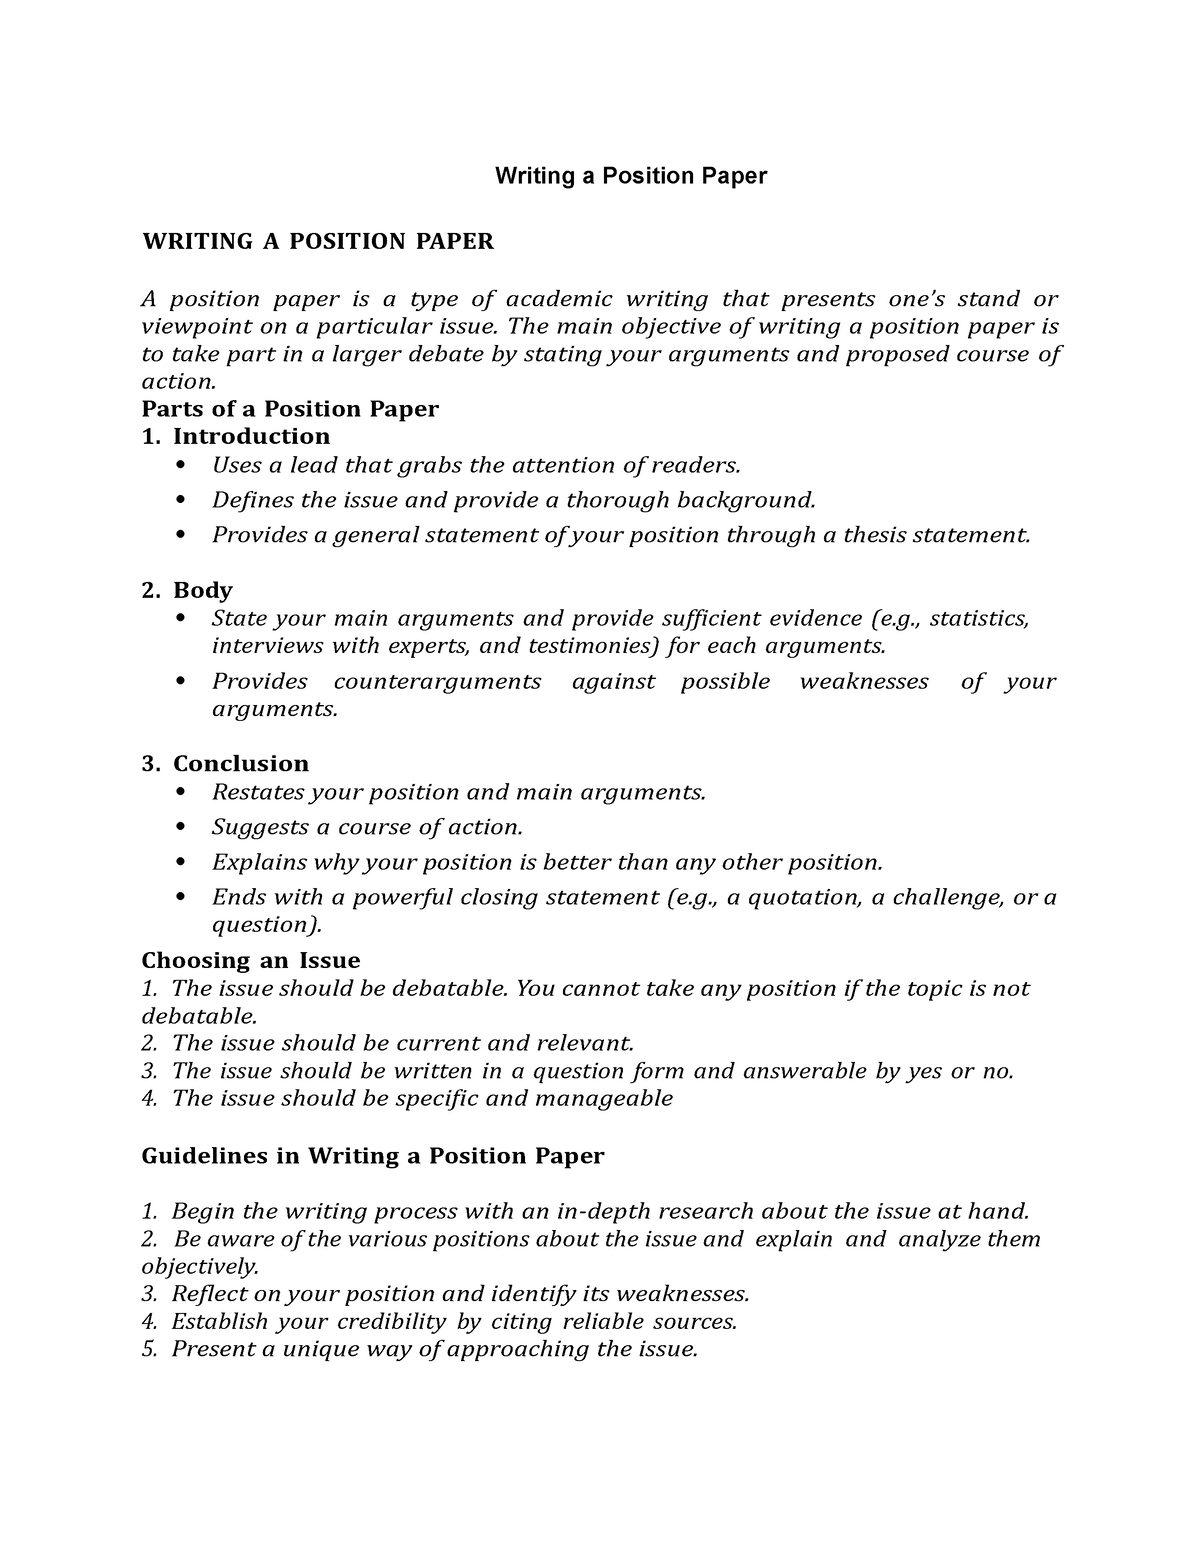 a position paper is an essay that expounds a